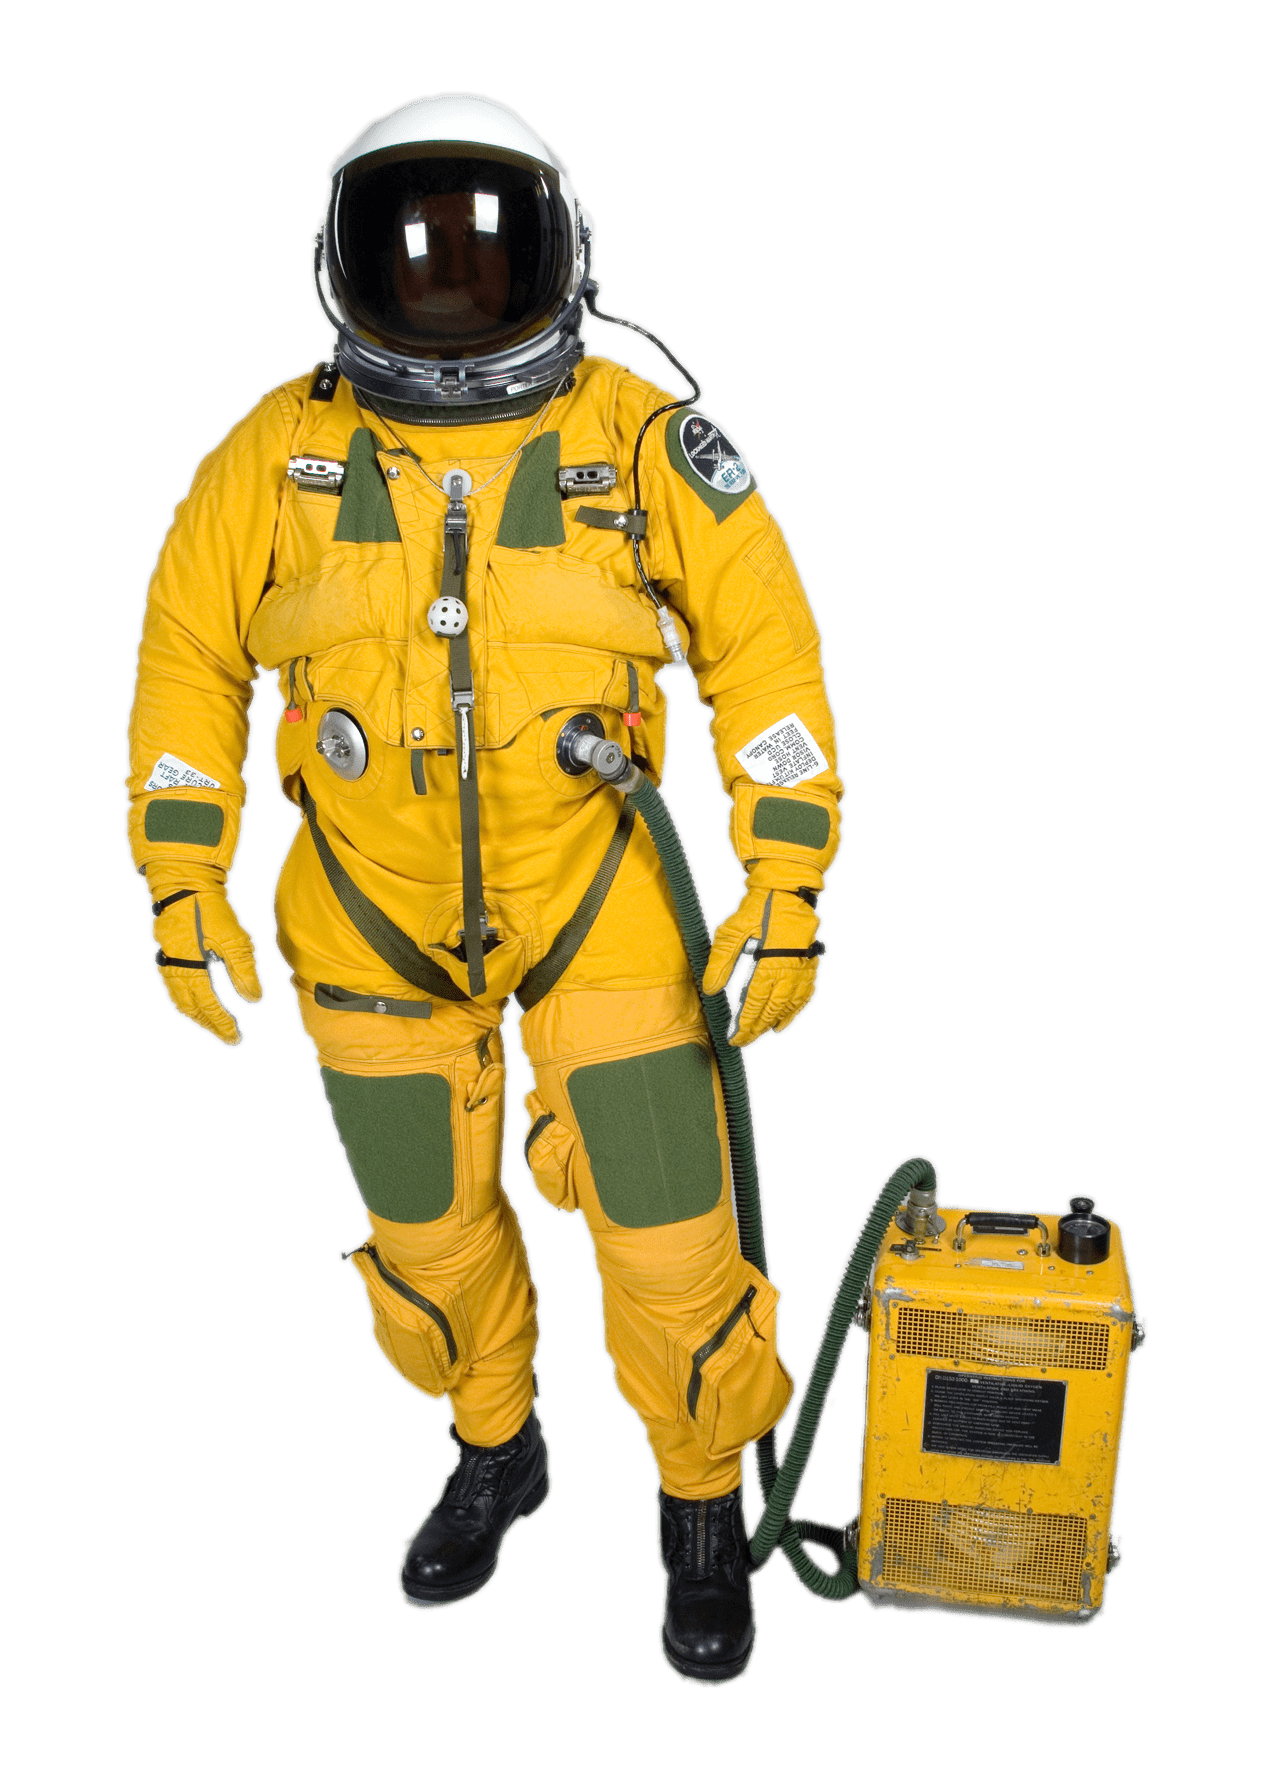 Pic Astronaut Suit Free Download Image PNG Image